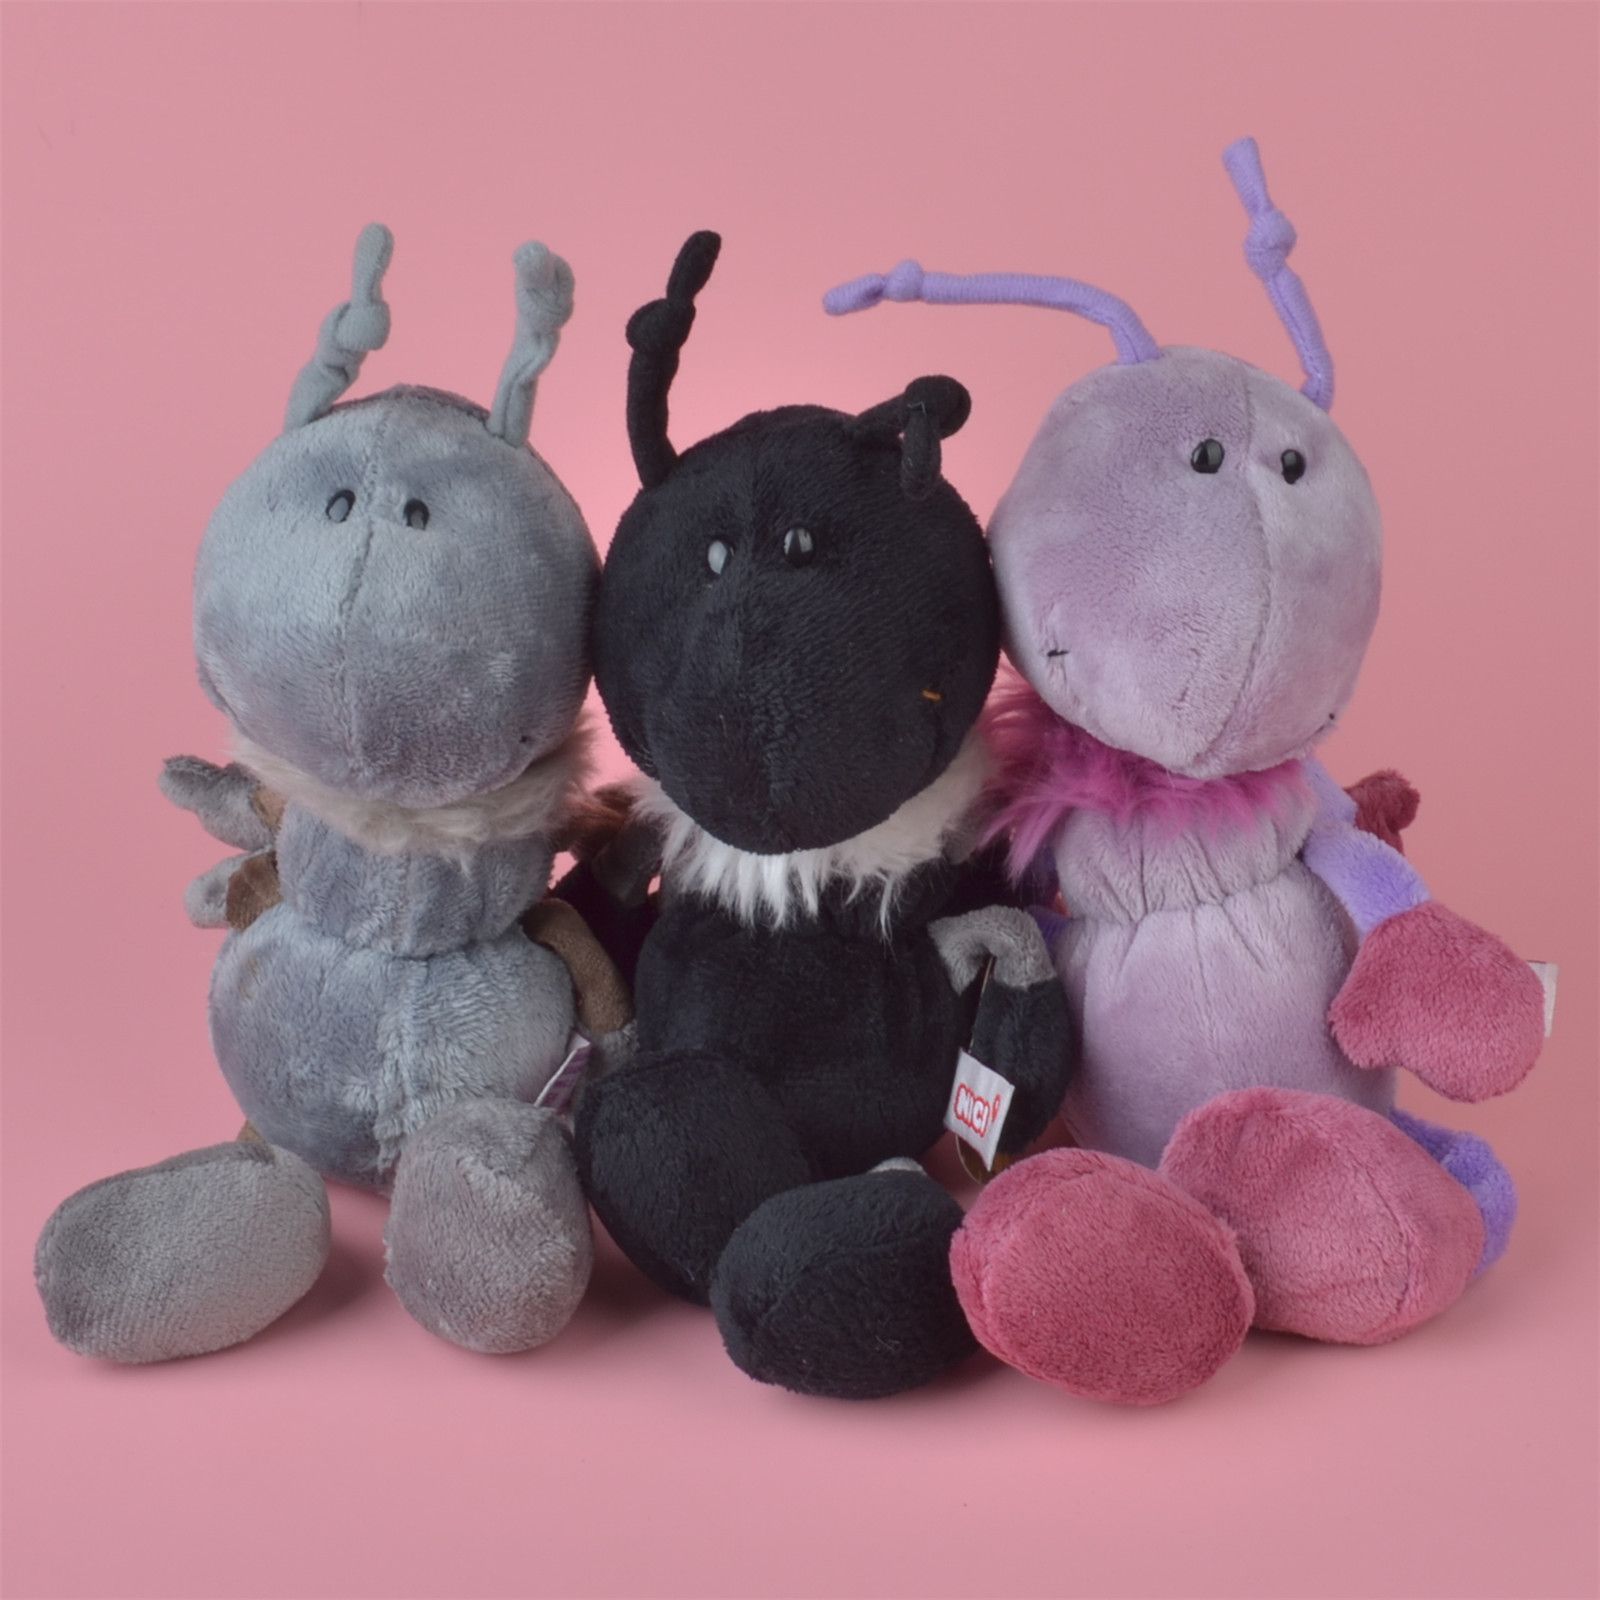 NICI Baby Kids Teddy Doll Free Shipping 25cm Black Color Ant Plush Toy 